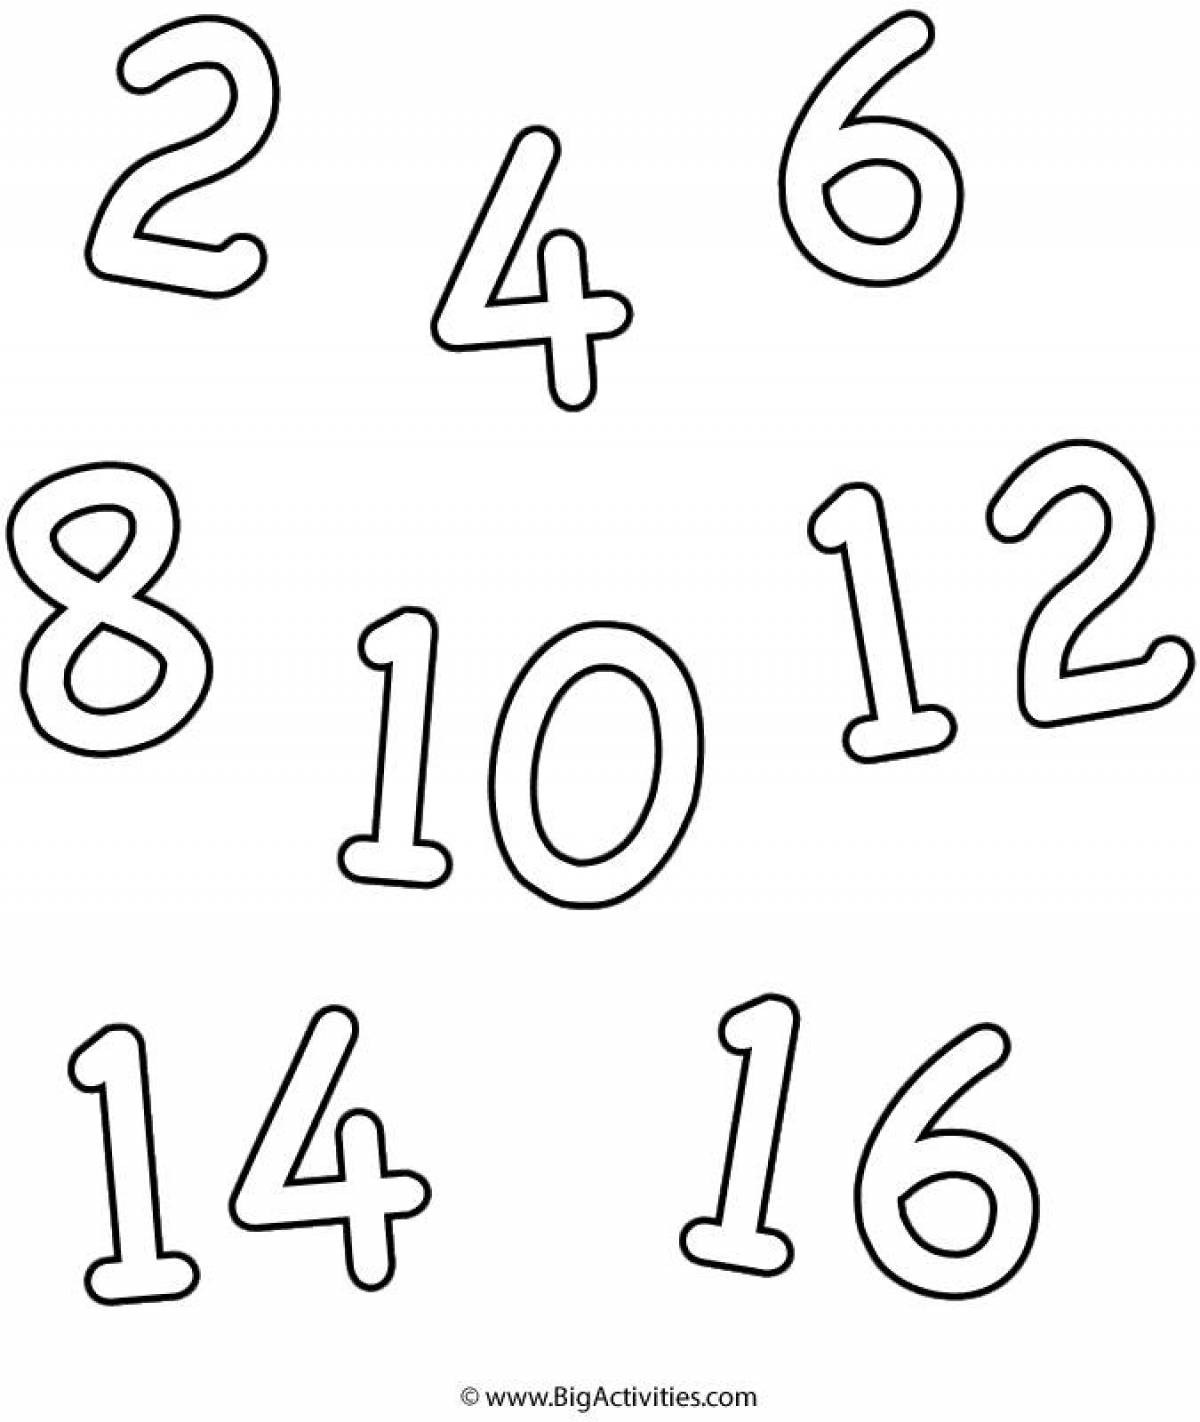 Color-explosion coloring page numbers from 1 to 10